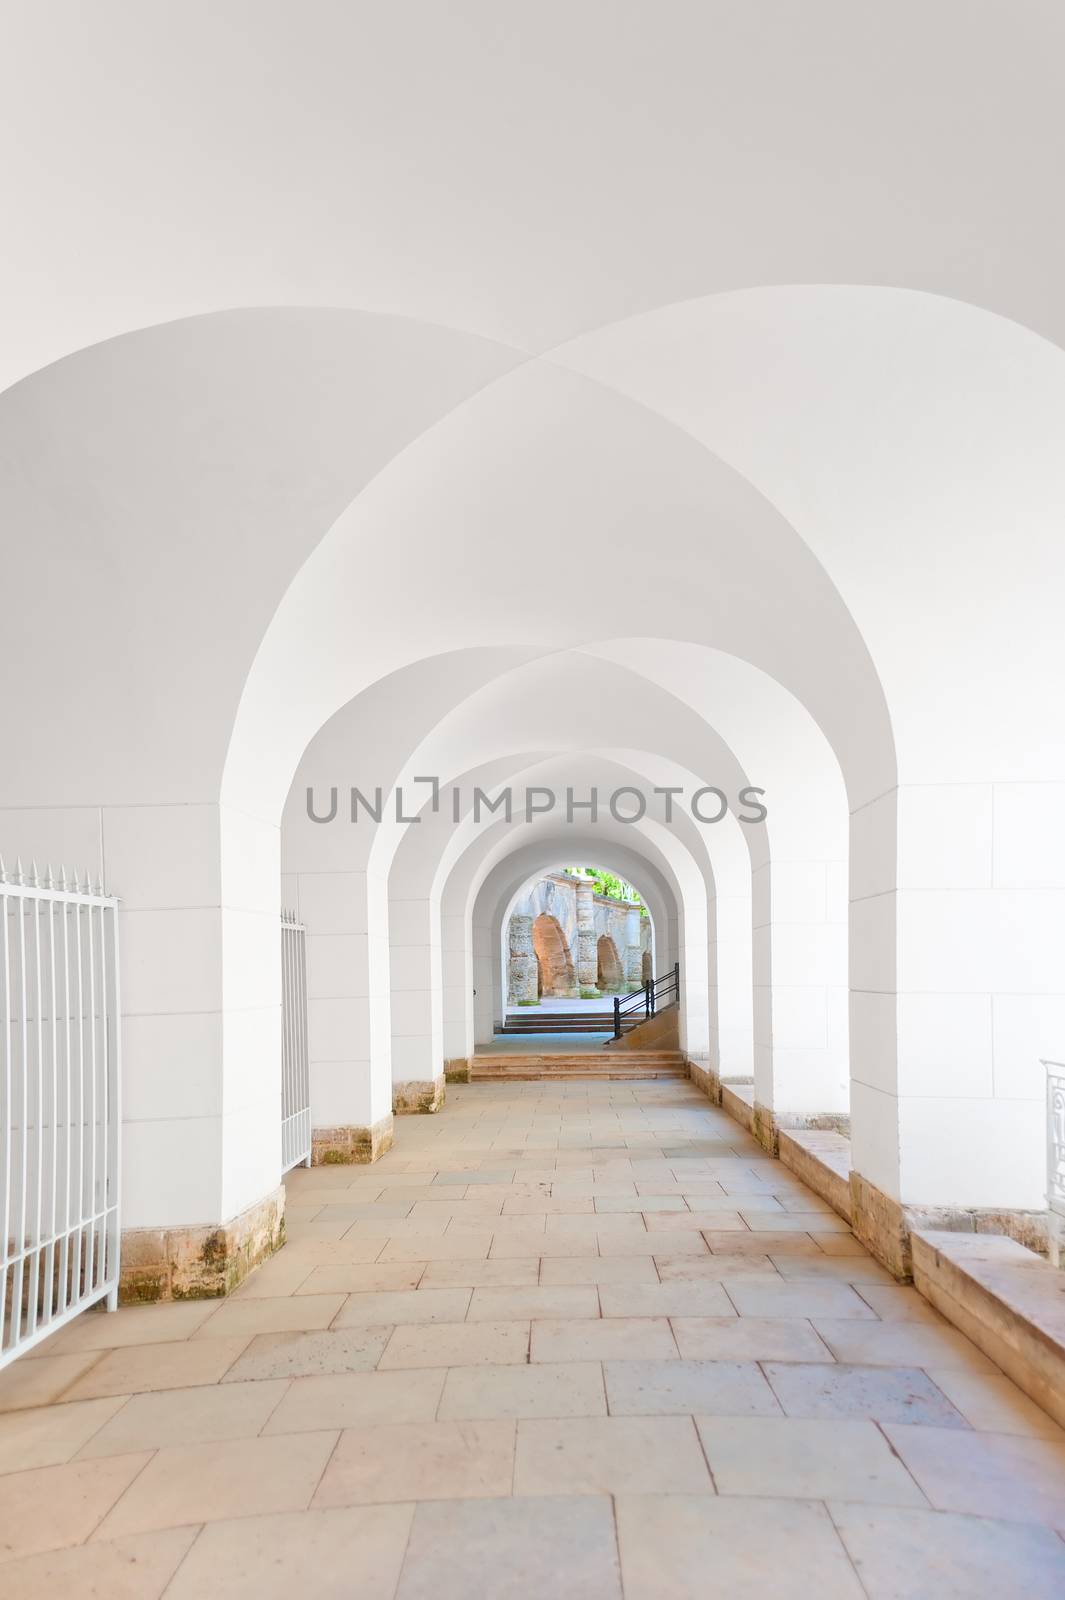 corridor with a ceiling in the form of arches in white